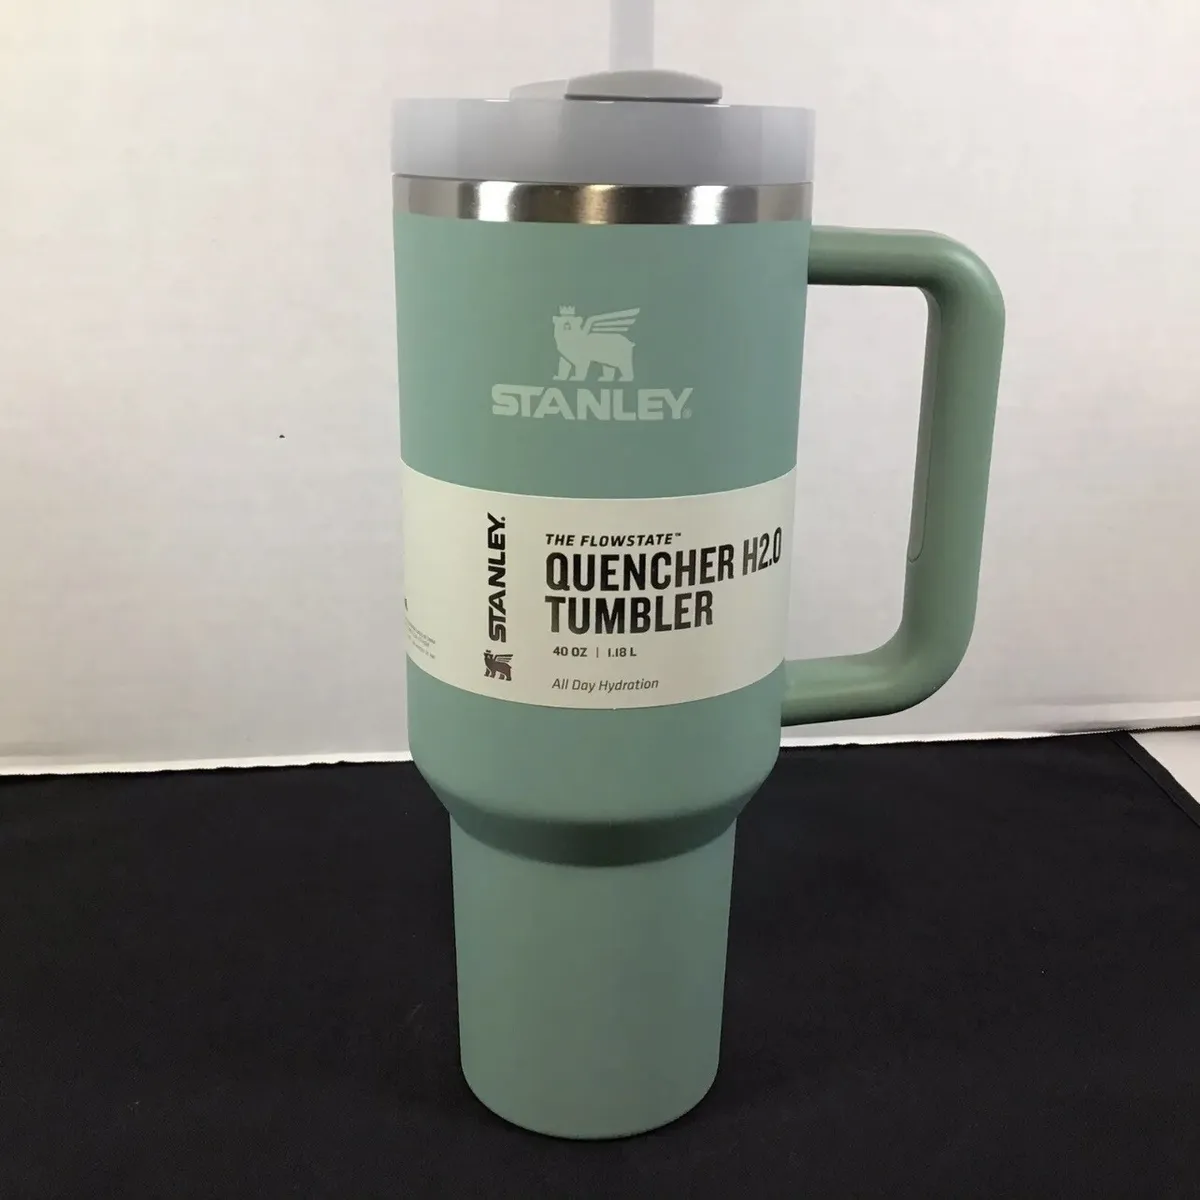 Stanley Flowstate Tumbler 40oz Eucalyptus Green All Day Hydration Quencher  H2.0